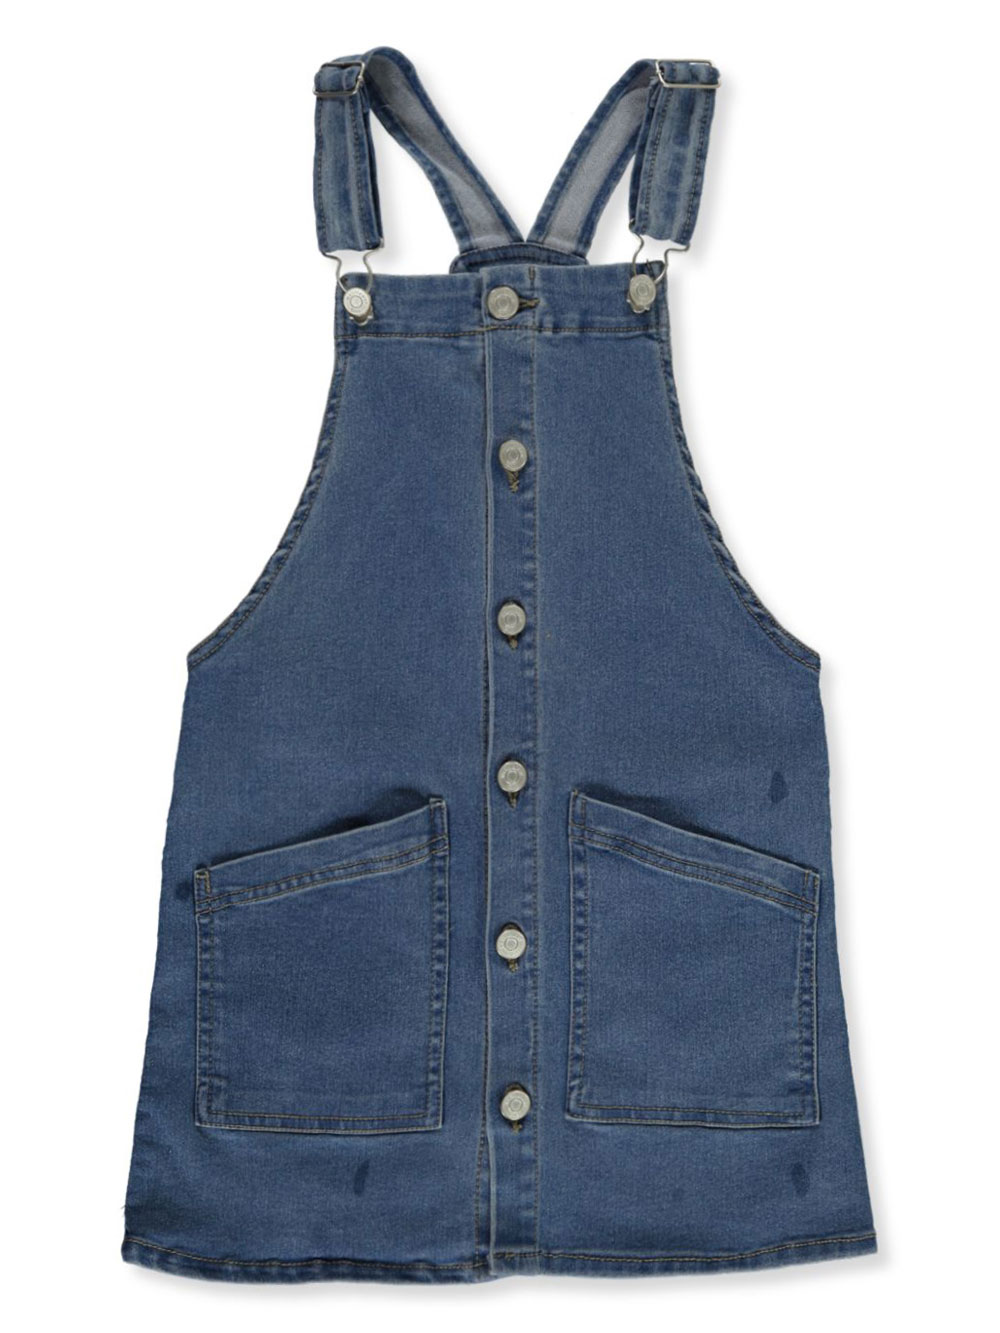 Overalls and Jumpers Denim Skirtalls